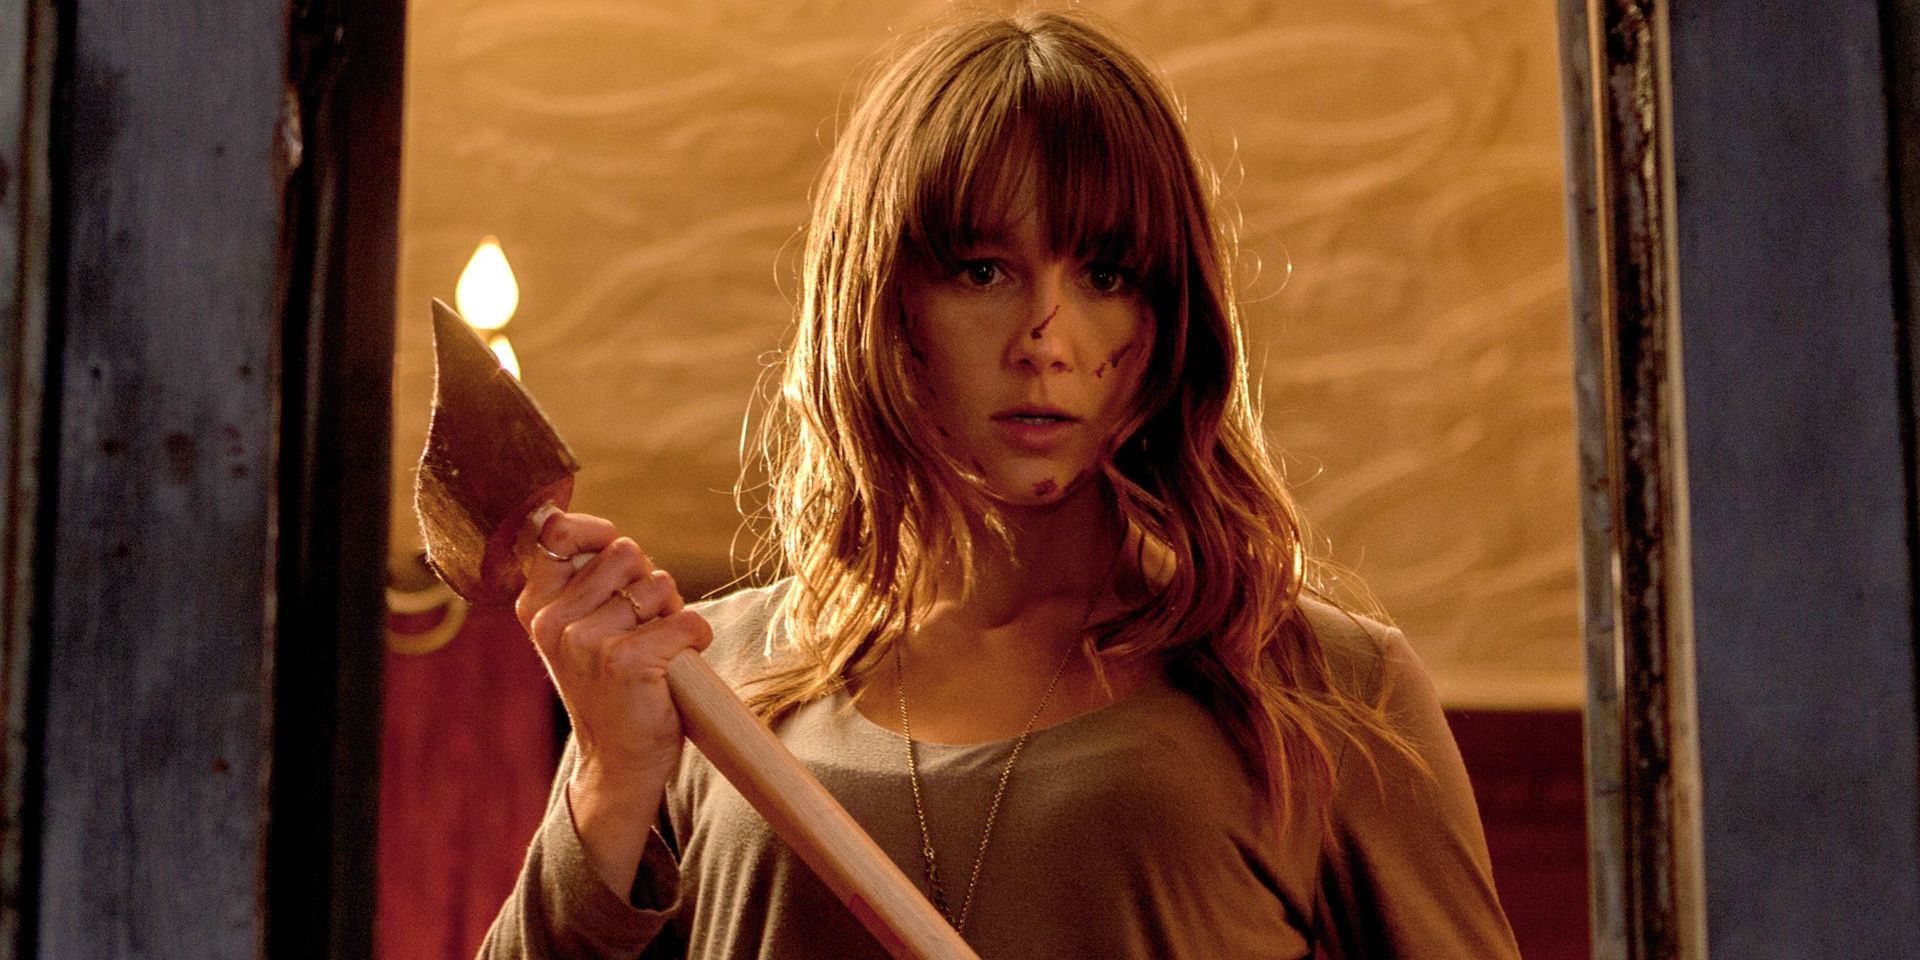 Erin holds an axe in You're Next